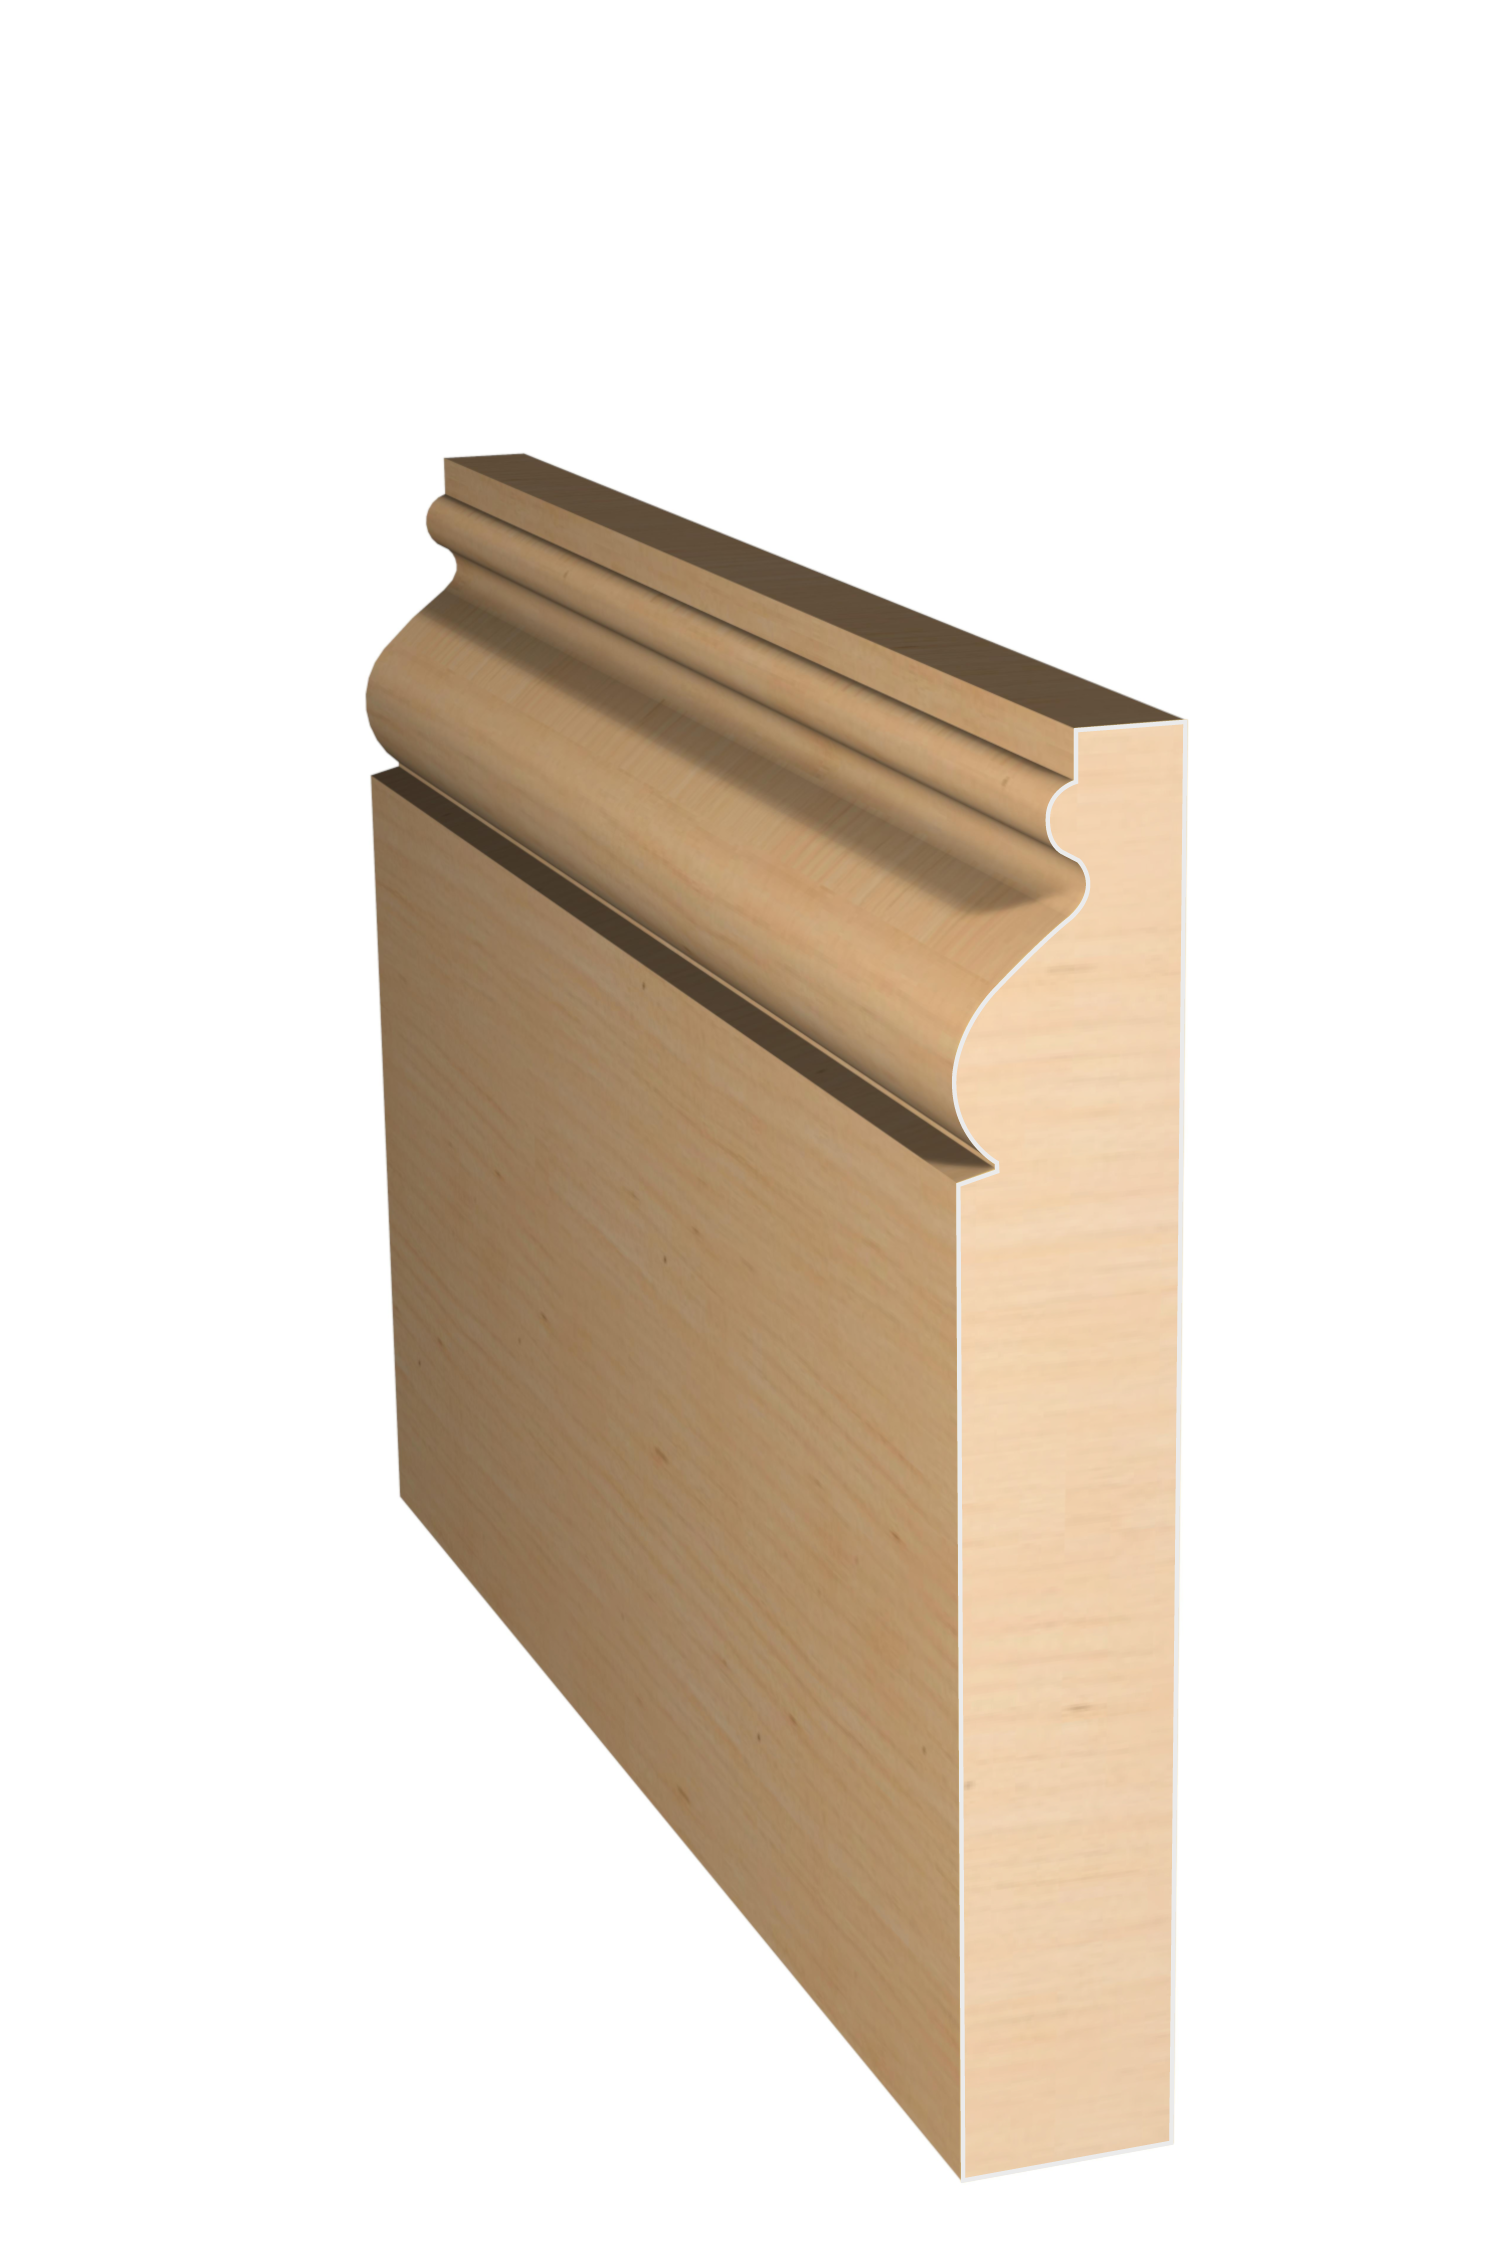 Three dimensional rendering of custom base wood molding BAPL414 made by Public Lumber Company in Detroit.